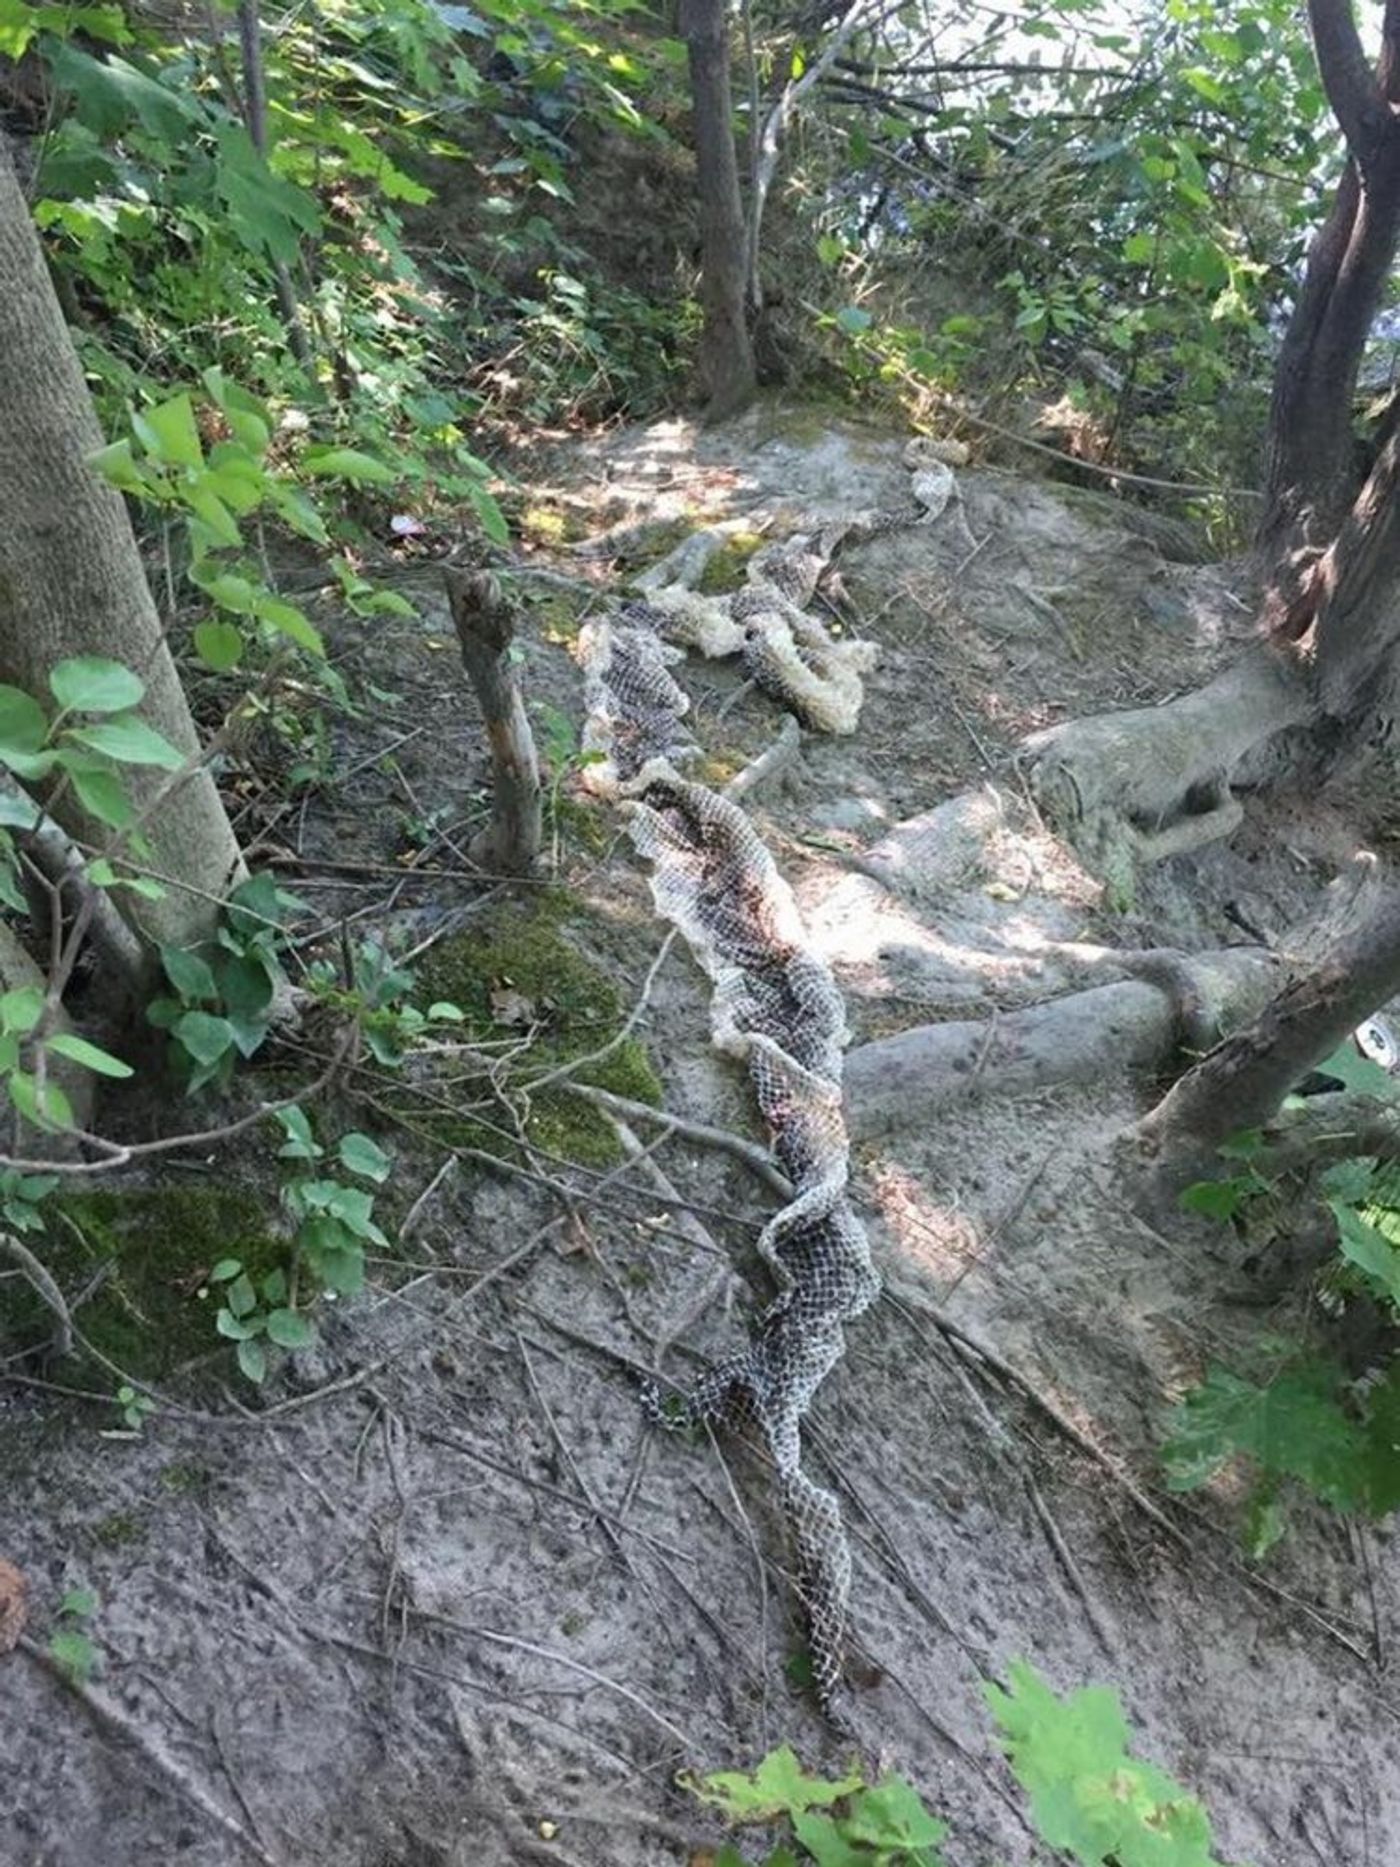 A massive snake skin was discovered near Main's Presumpscot River this weekend.